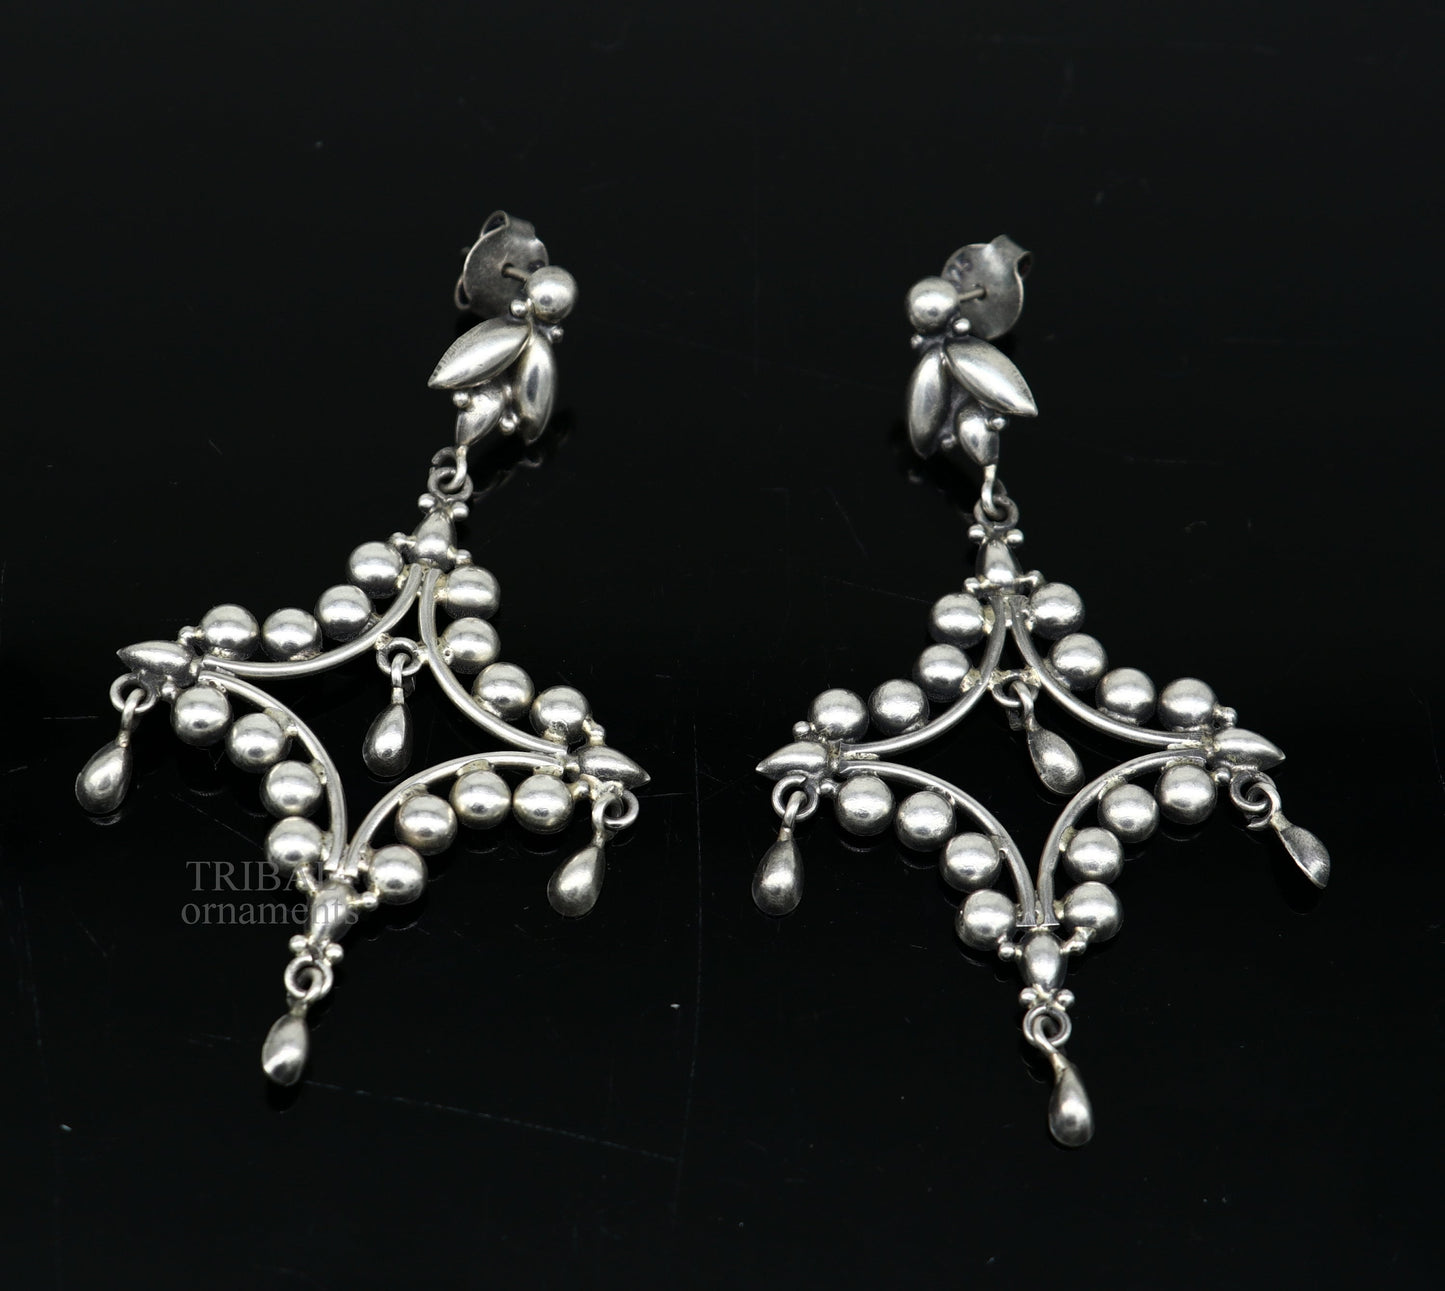 Vintage antique design handmade 92.5 sterling silver gorgeous vintage stylish stud earring fabulous light weight silver earrings ear1090 - TRIBAL ORNAMENTS